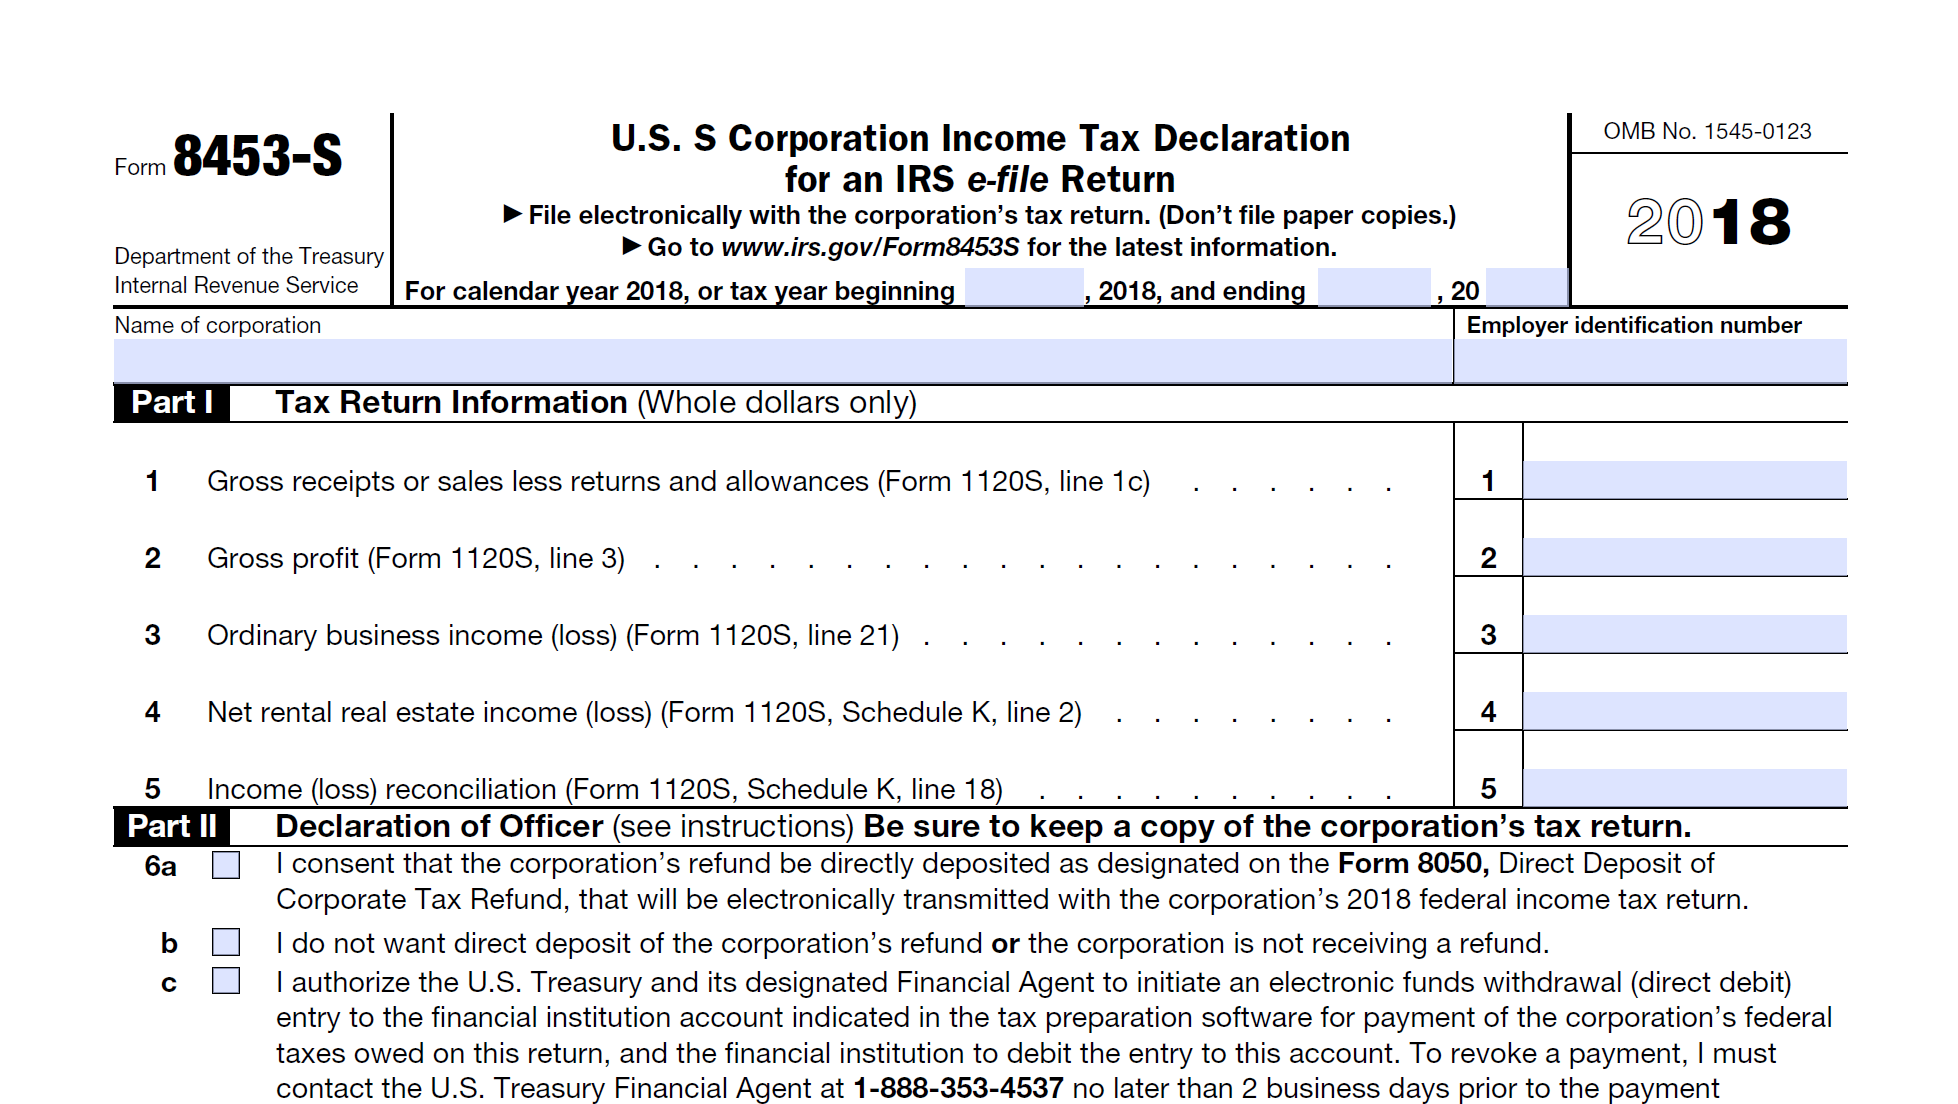 Form 8453-S: U.S. S Corporation Income Tax Declaration for an IRS e-file Return